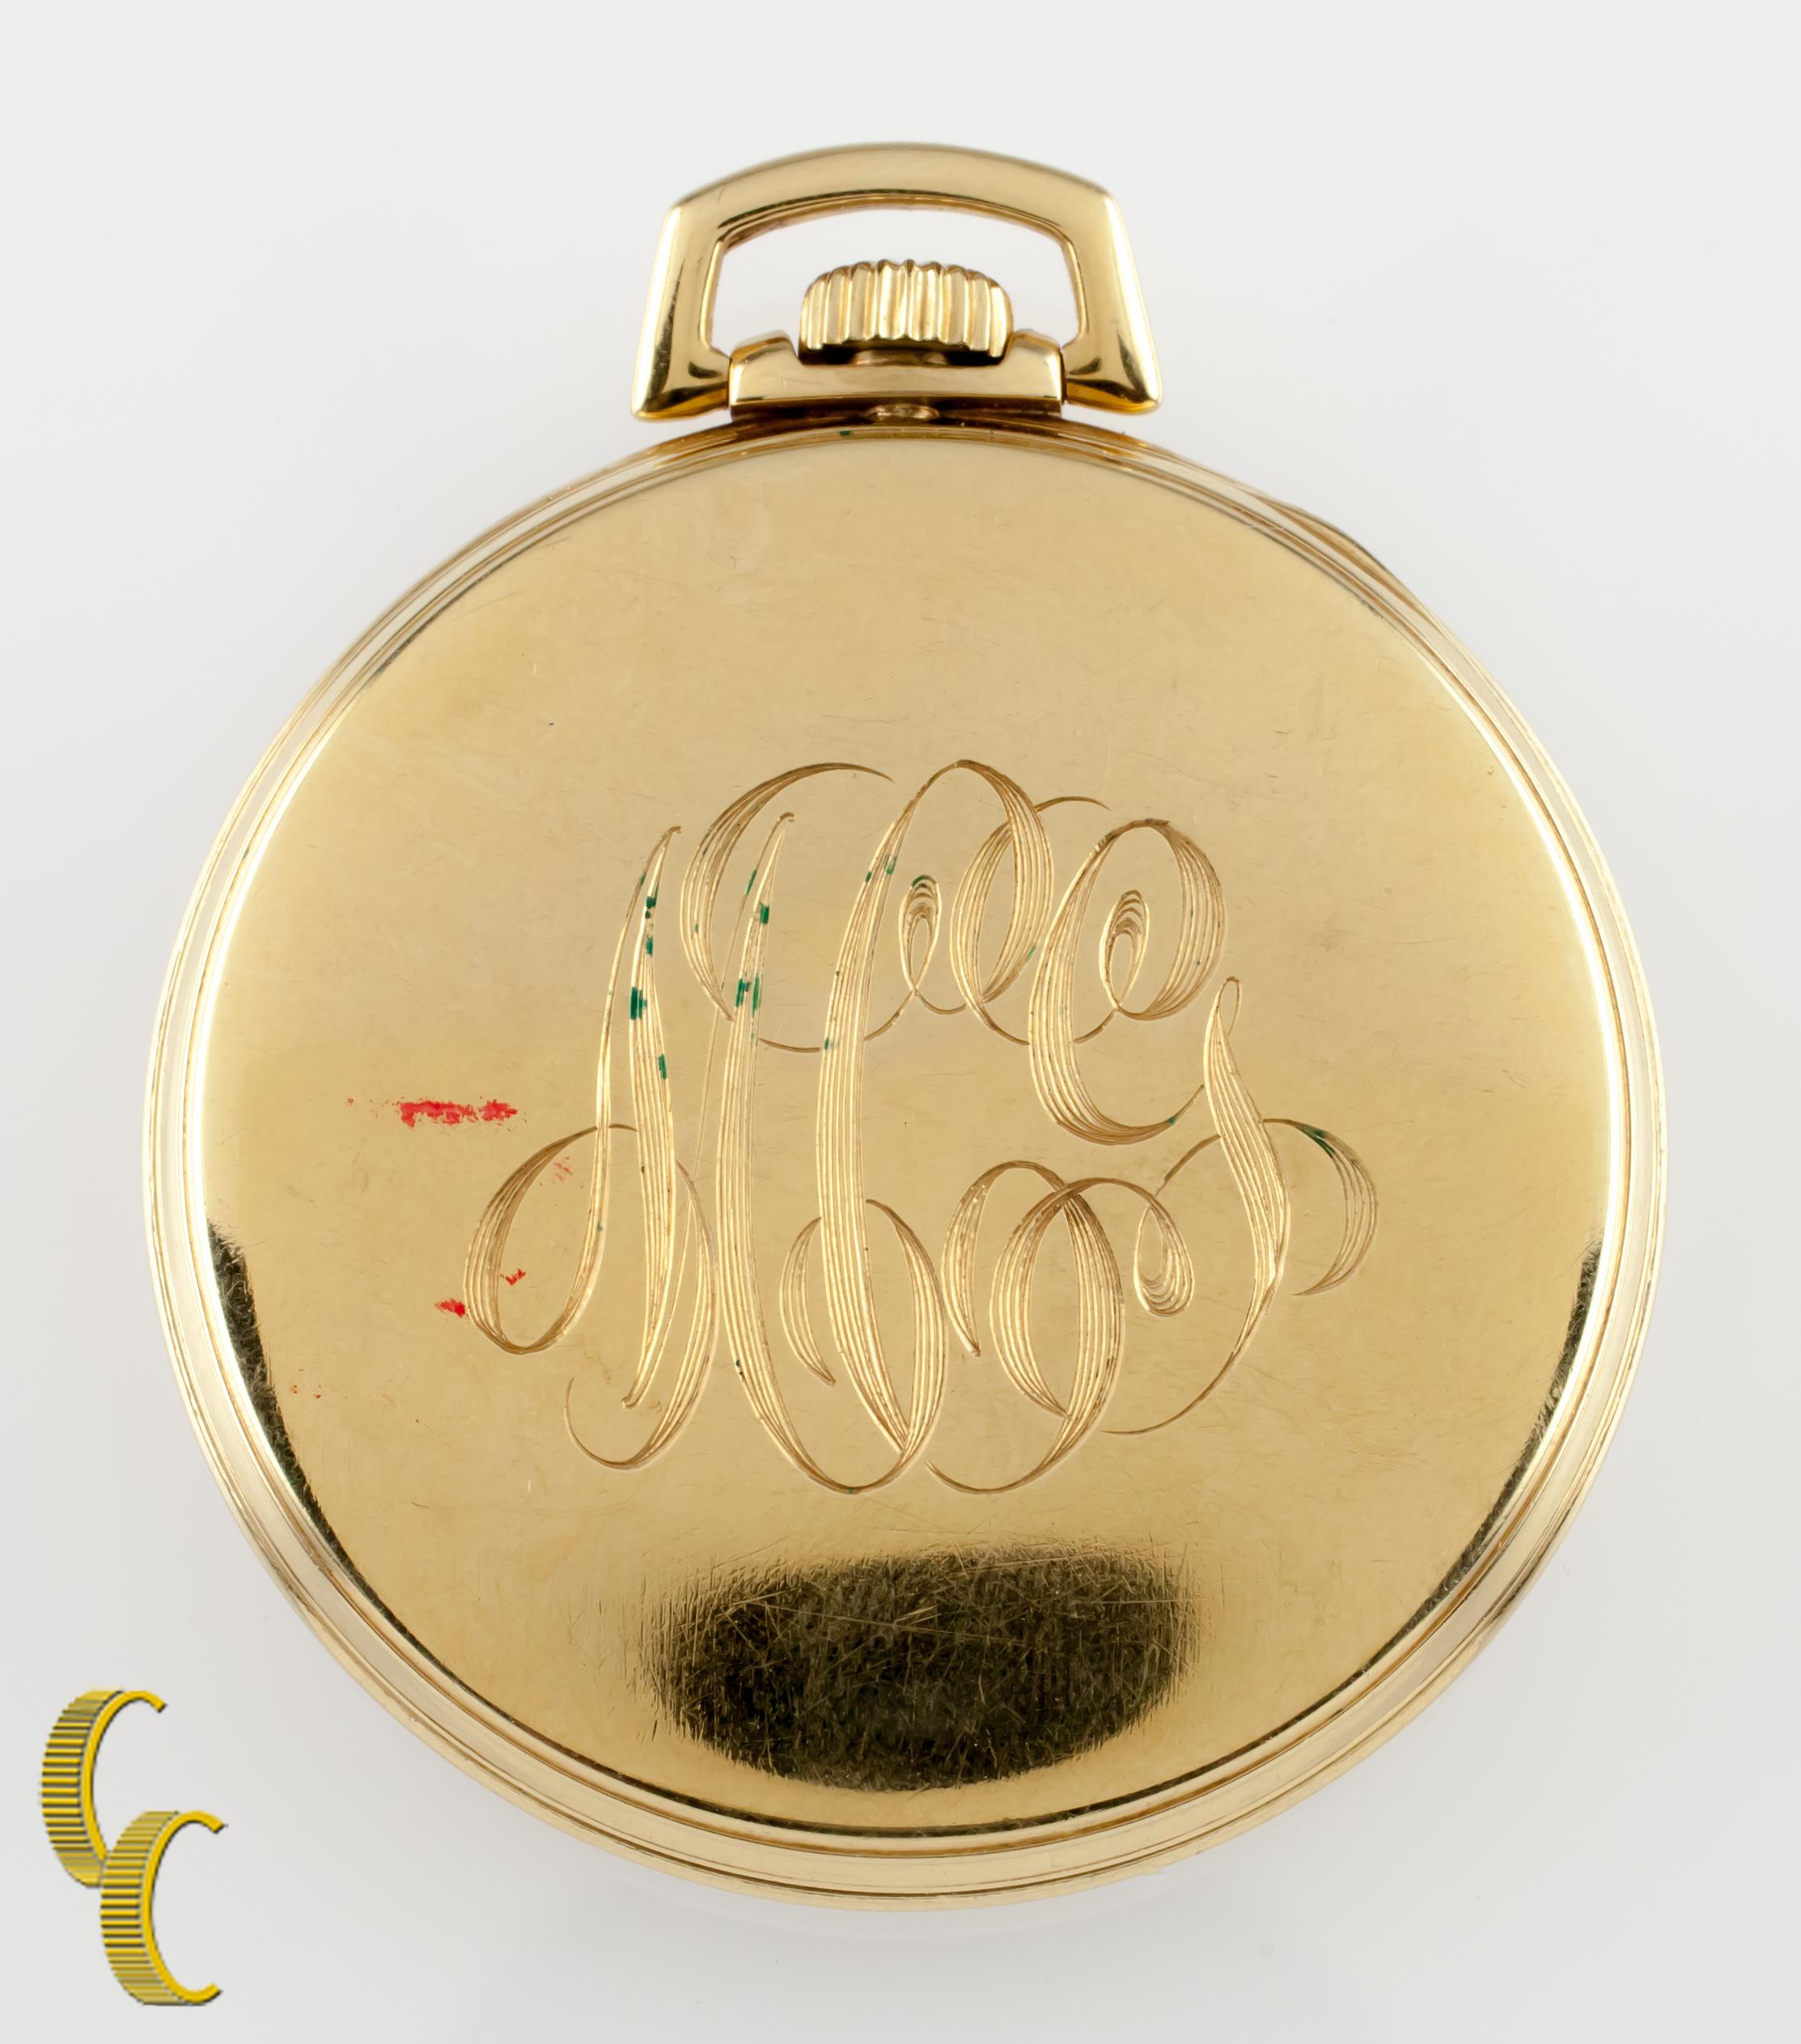 Beautiful Vintage Waltham Pocket Watch w/ Silver Dial Including Gold Hands & Dedicated Second Dial
14K Yellow Gold Case w/ Intricate Hand-Etched Design on Case
Case Serial #6196495
21-Jewel Waltham Movement Serial #32330883
Grade #Colr
Year of